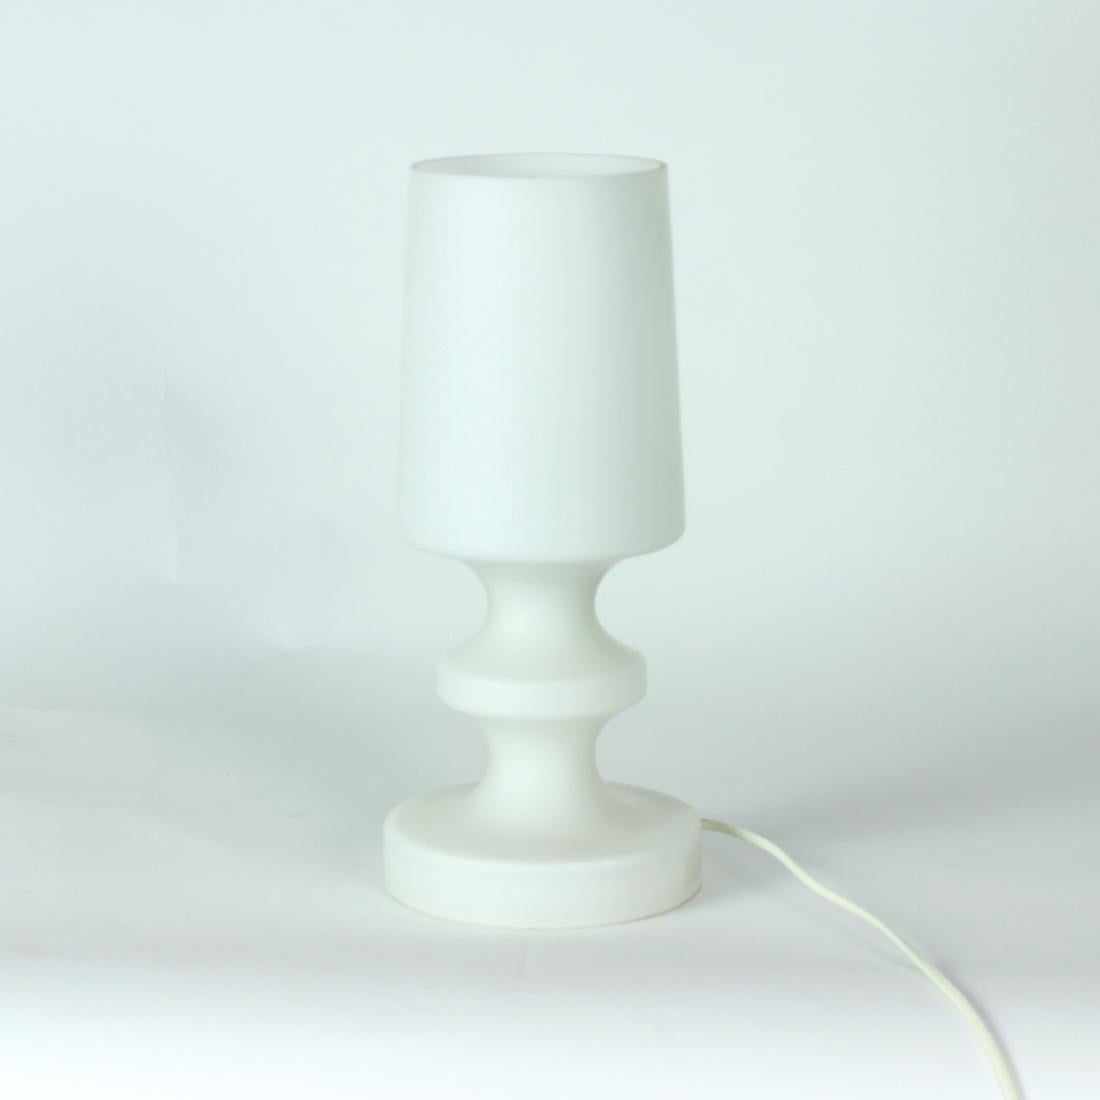 Iconic table lamp produced in mid-century design era of Czechoslovakia. Produced by OPP Jihlava, design by Stefan Tabery. Tabery produced a line of glass lamps in shapes of chess pieces. This one is an original piece, produced out of a opaline